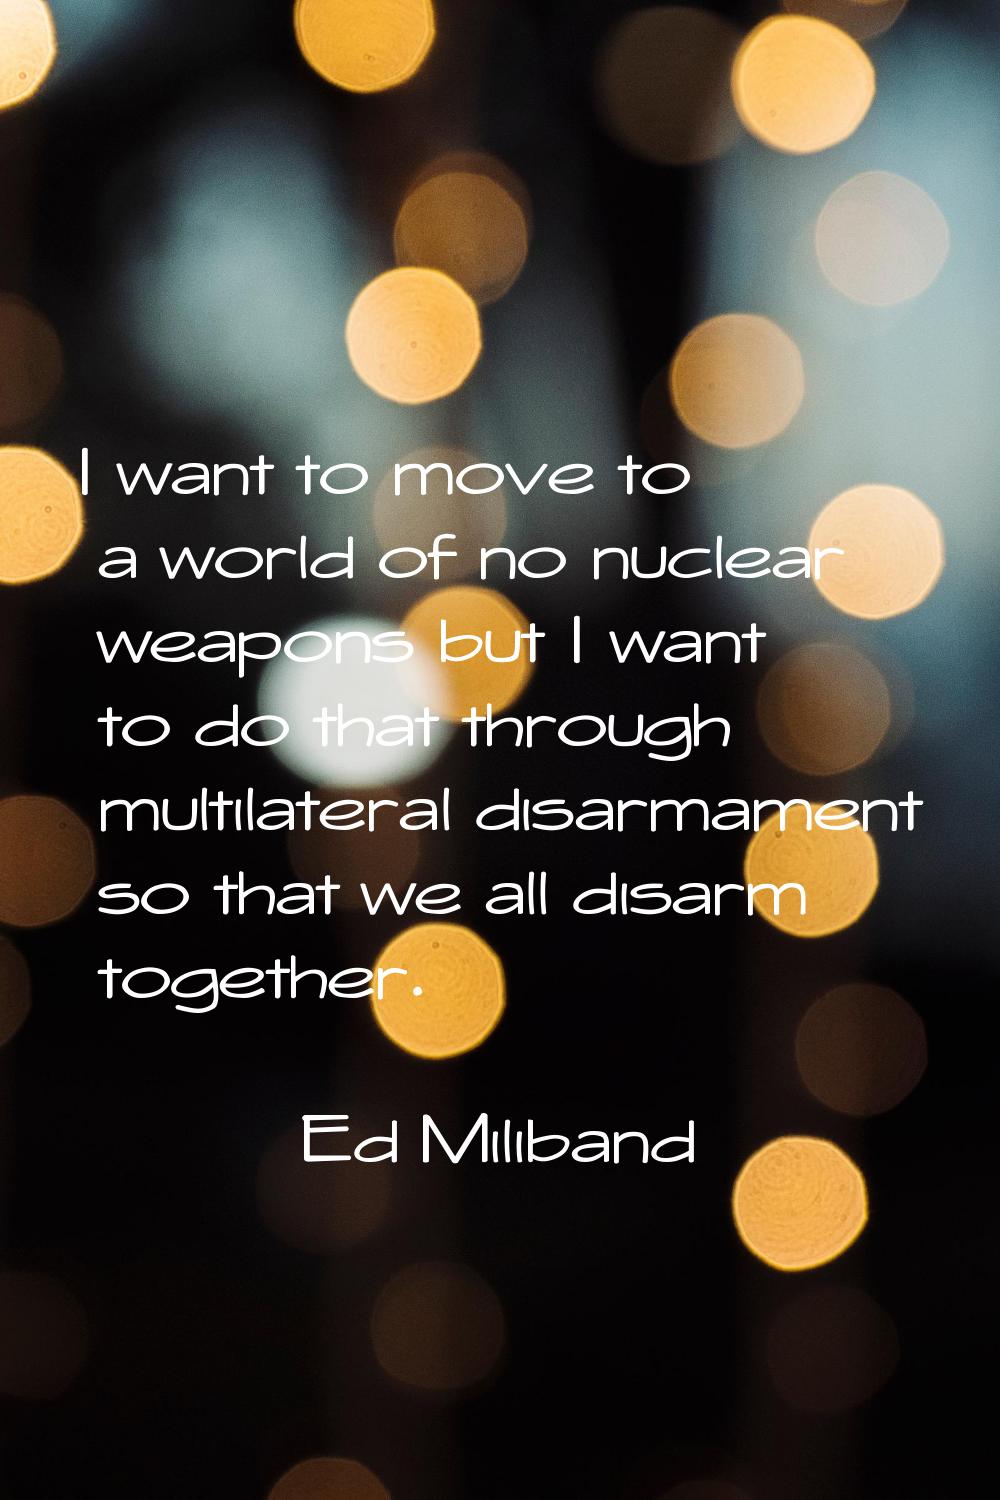 I want to move to a world of no nuclear weapons but I want to do that through multilateral disarmam